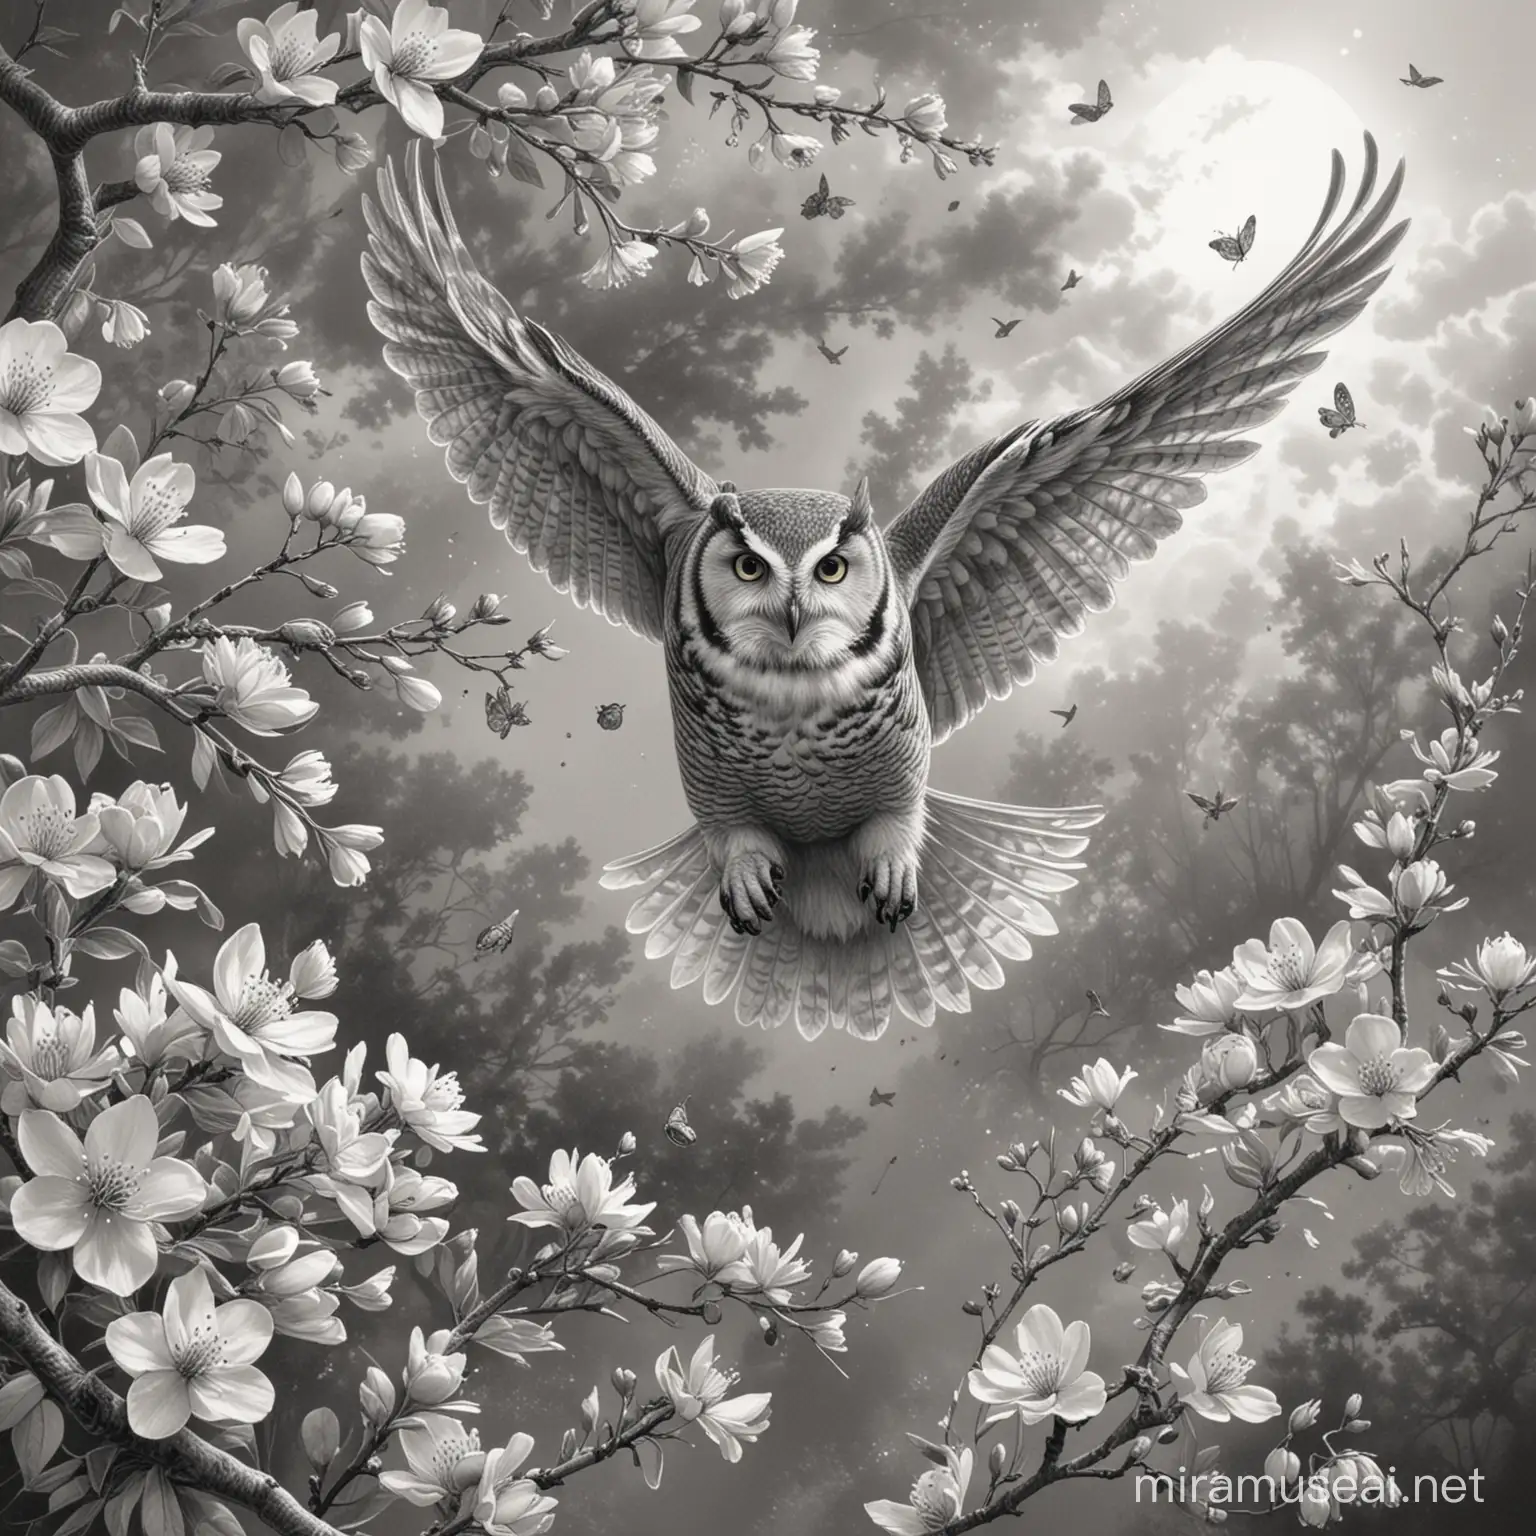 Grey scale sketch, owl soaring over apple blossom dropping honey